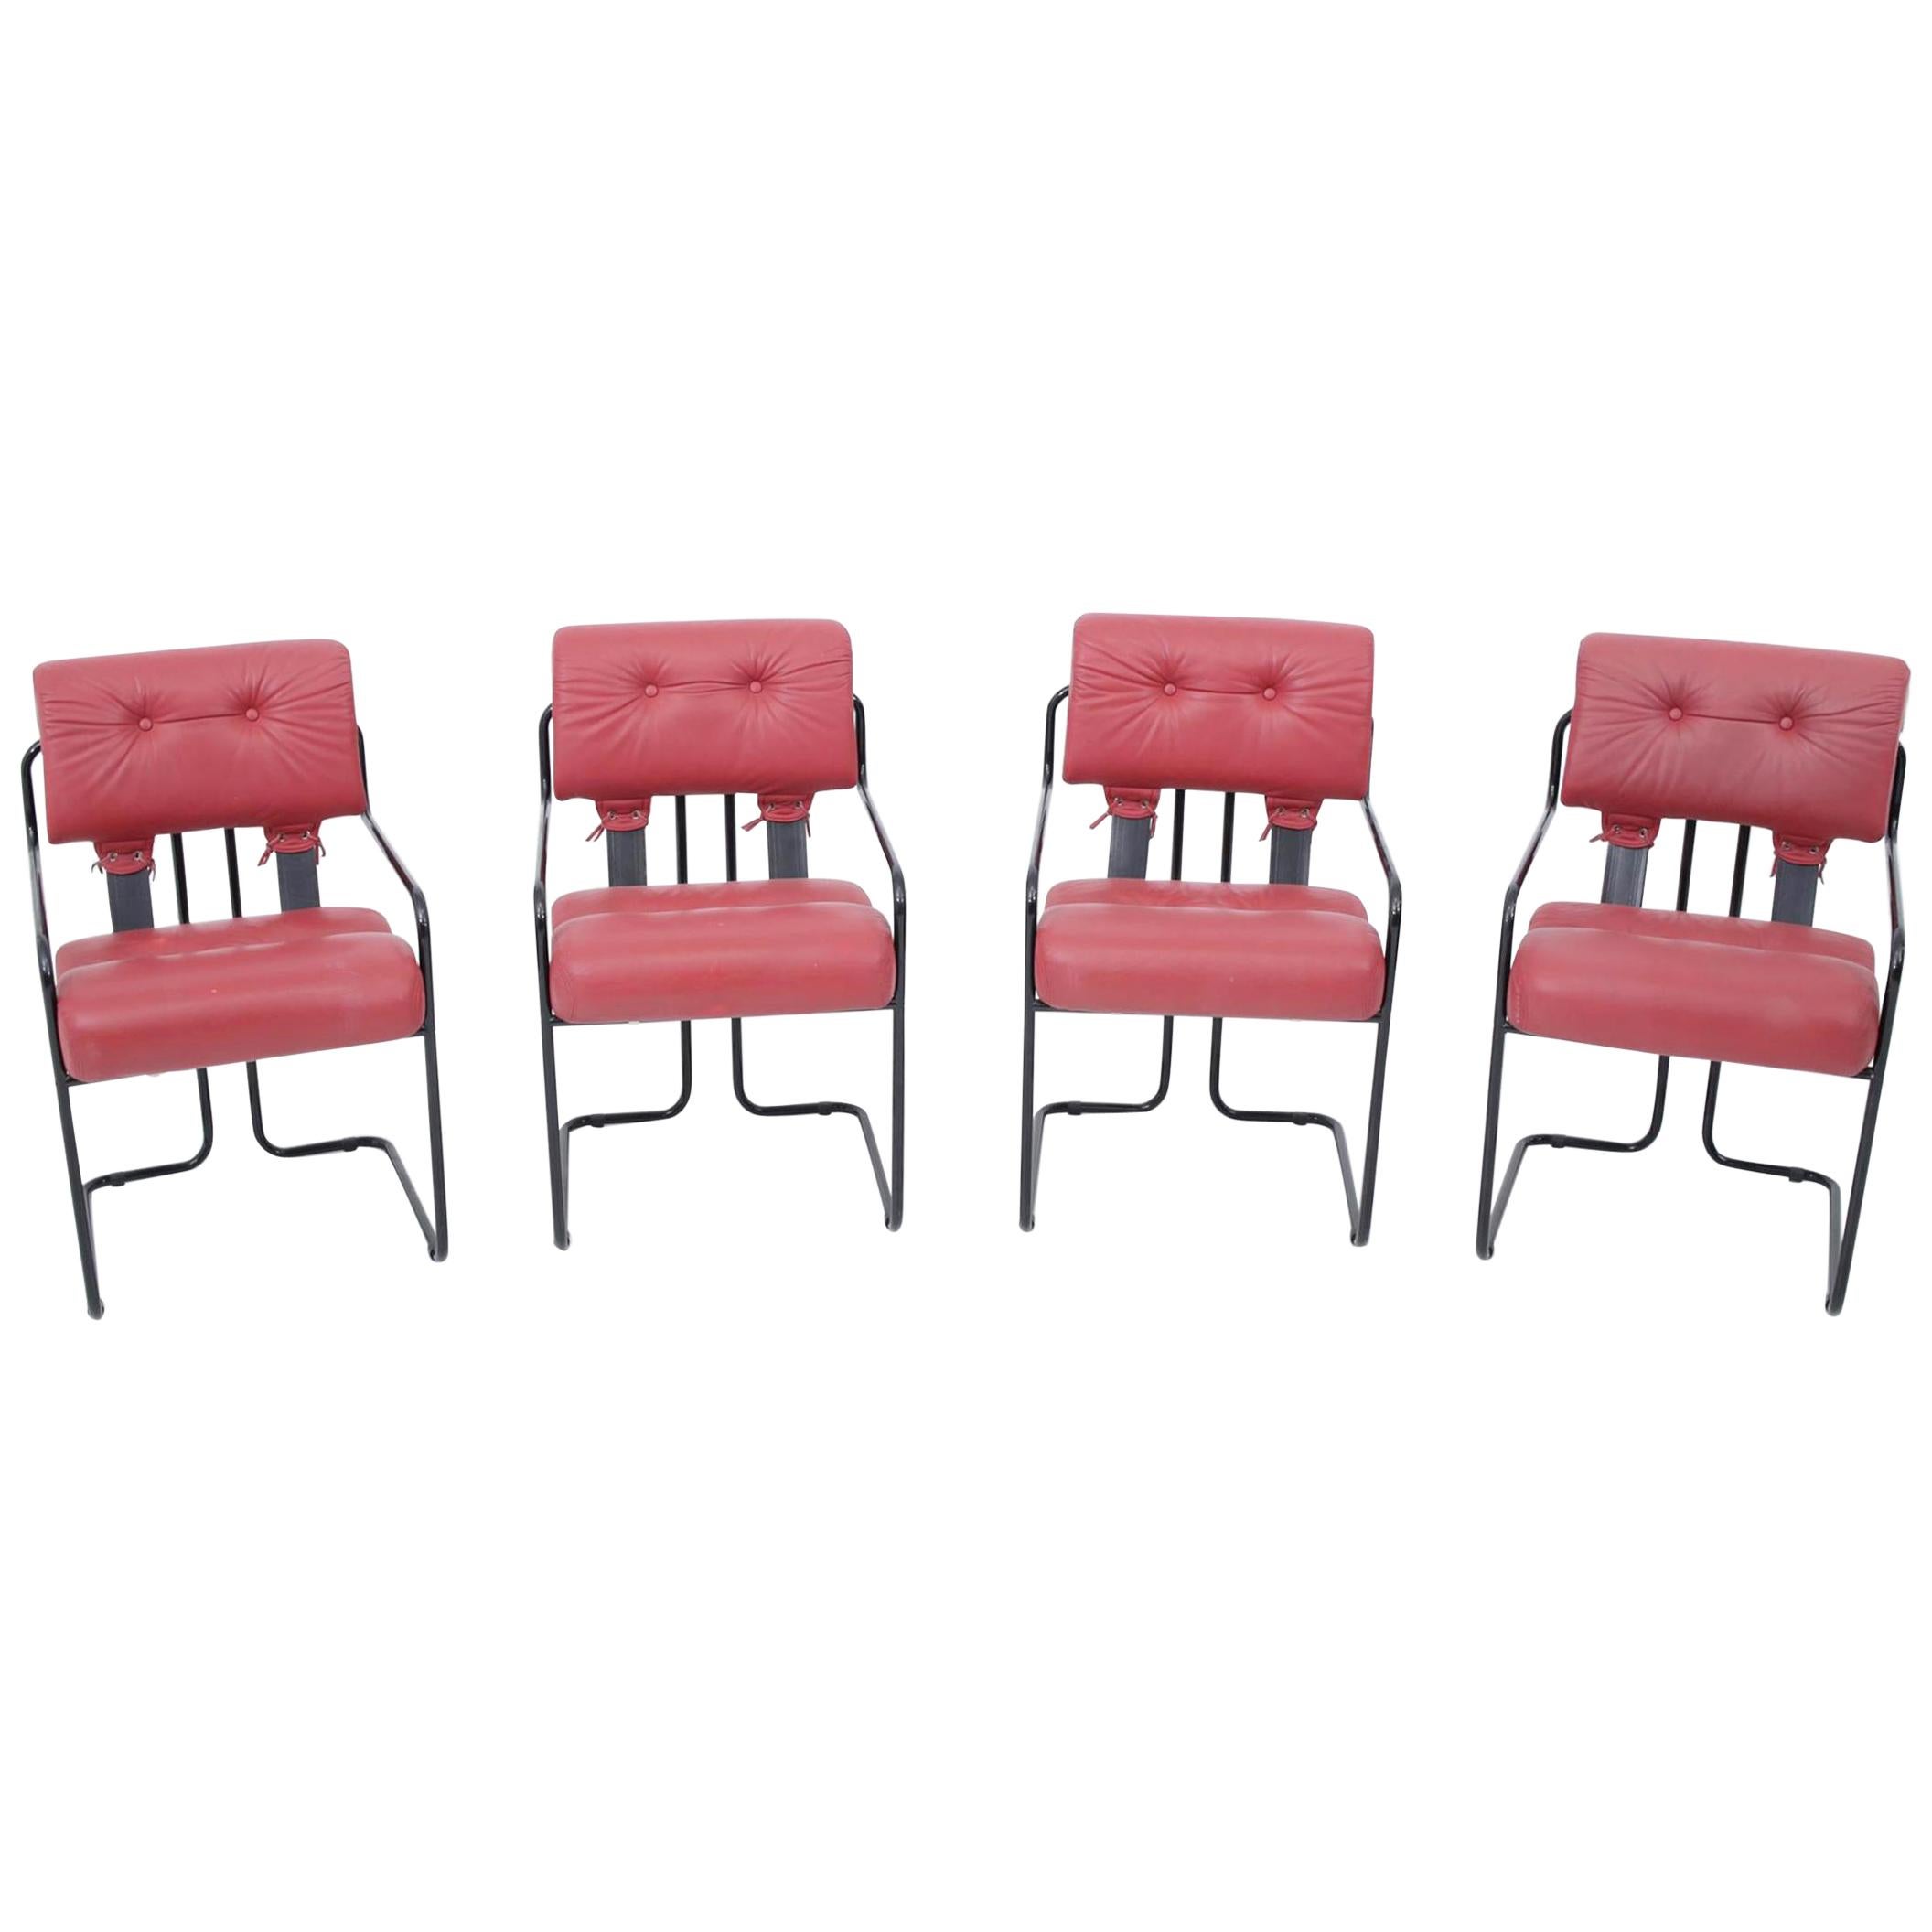 Pace Tucroma dining chairs by Guido Faleschini. Italian red leather and metal.